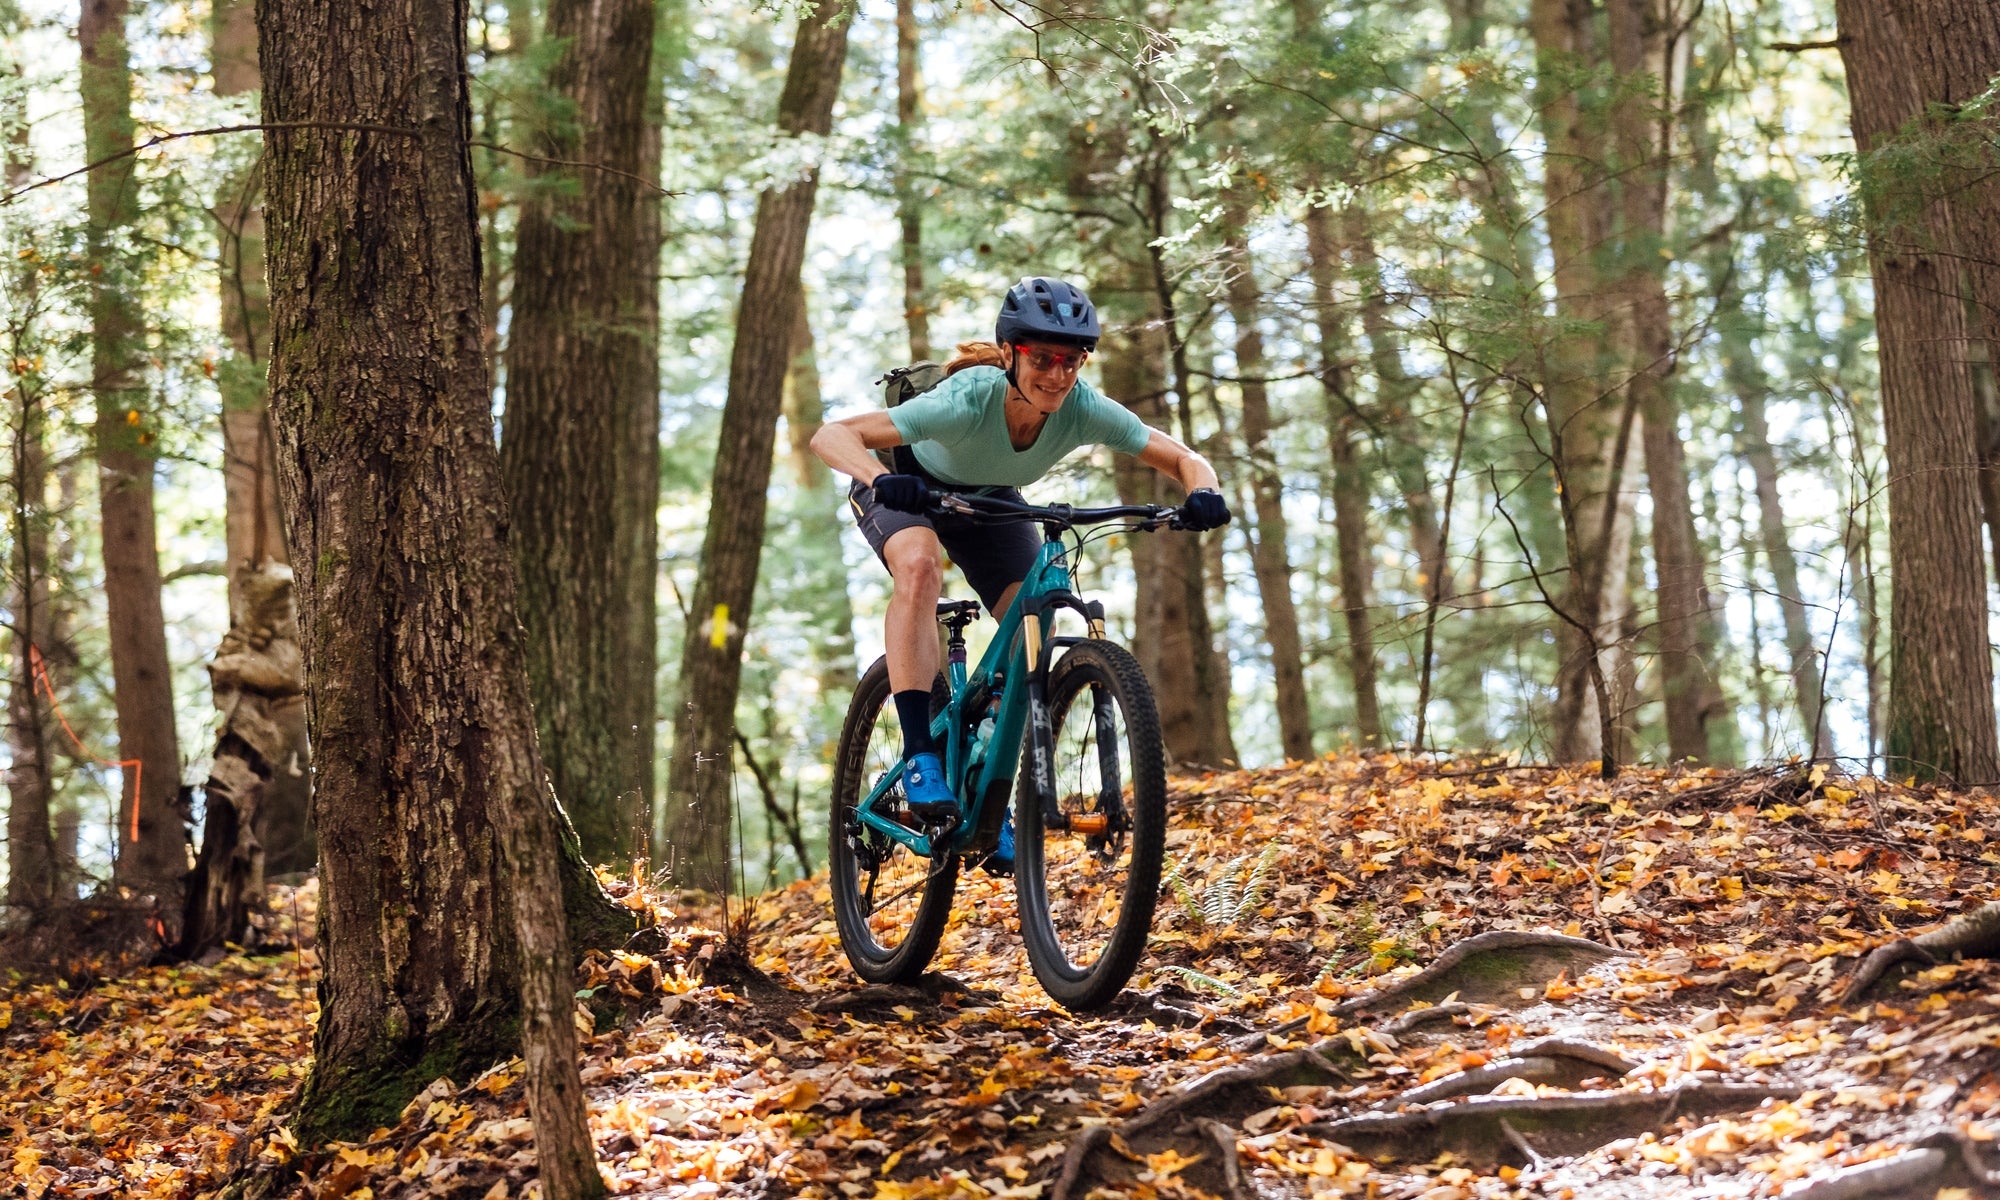 What Is a “Downcountry” Mountain Bike?